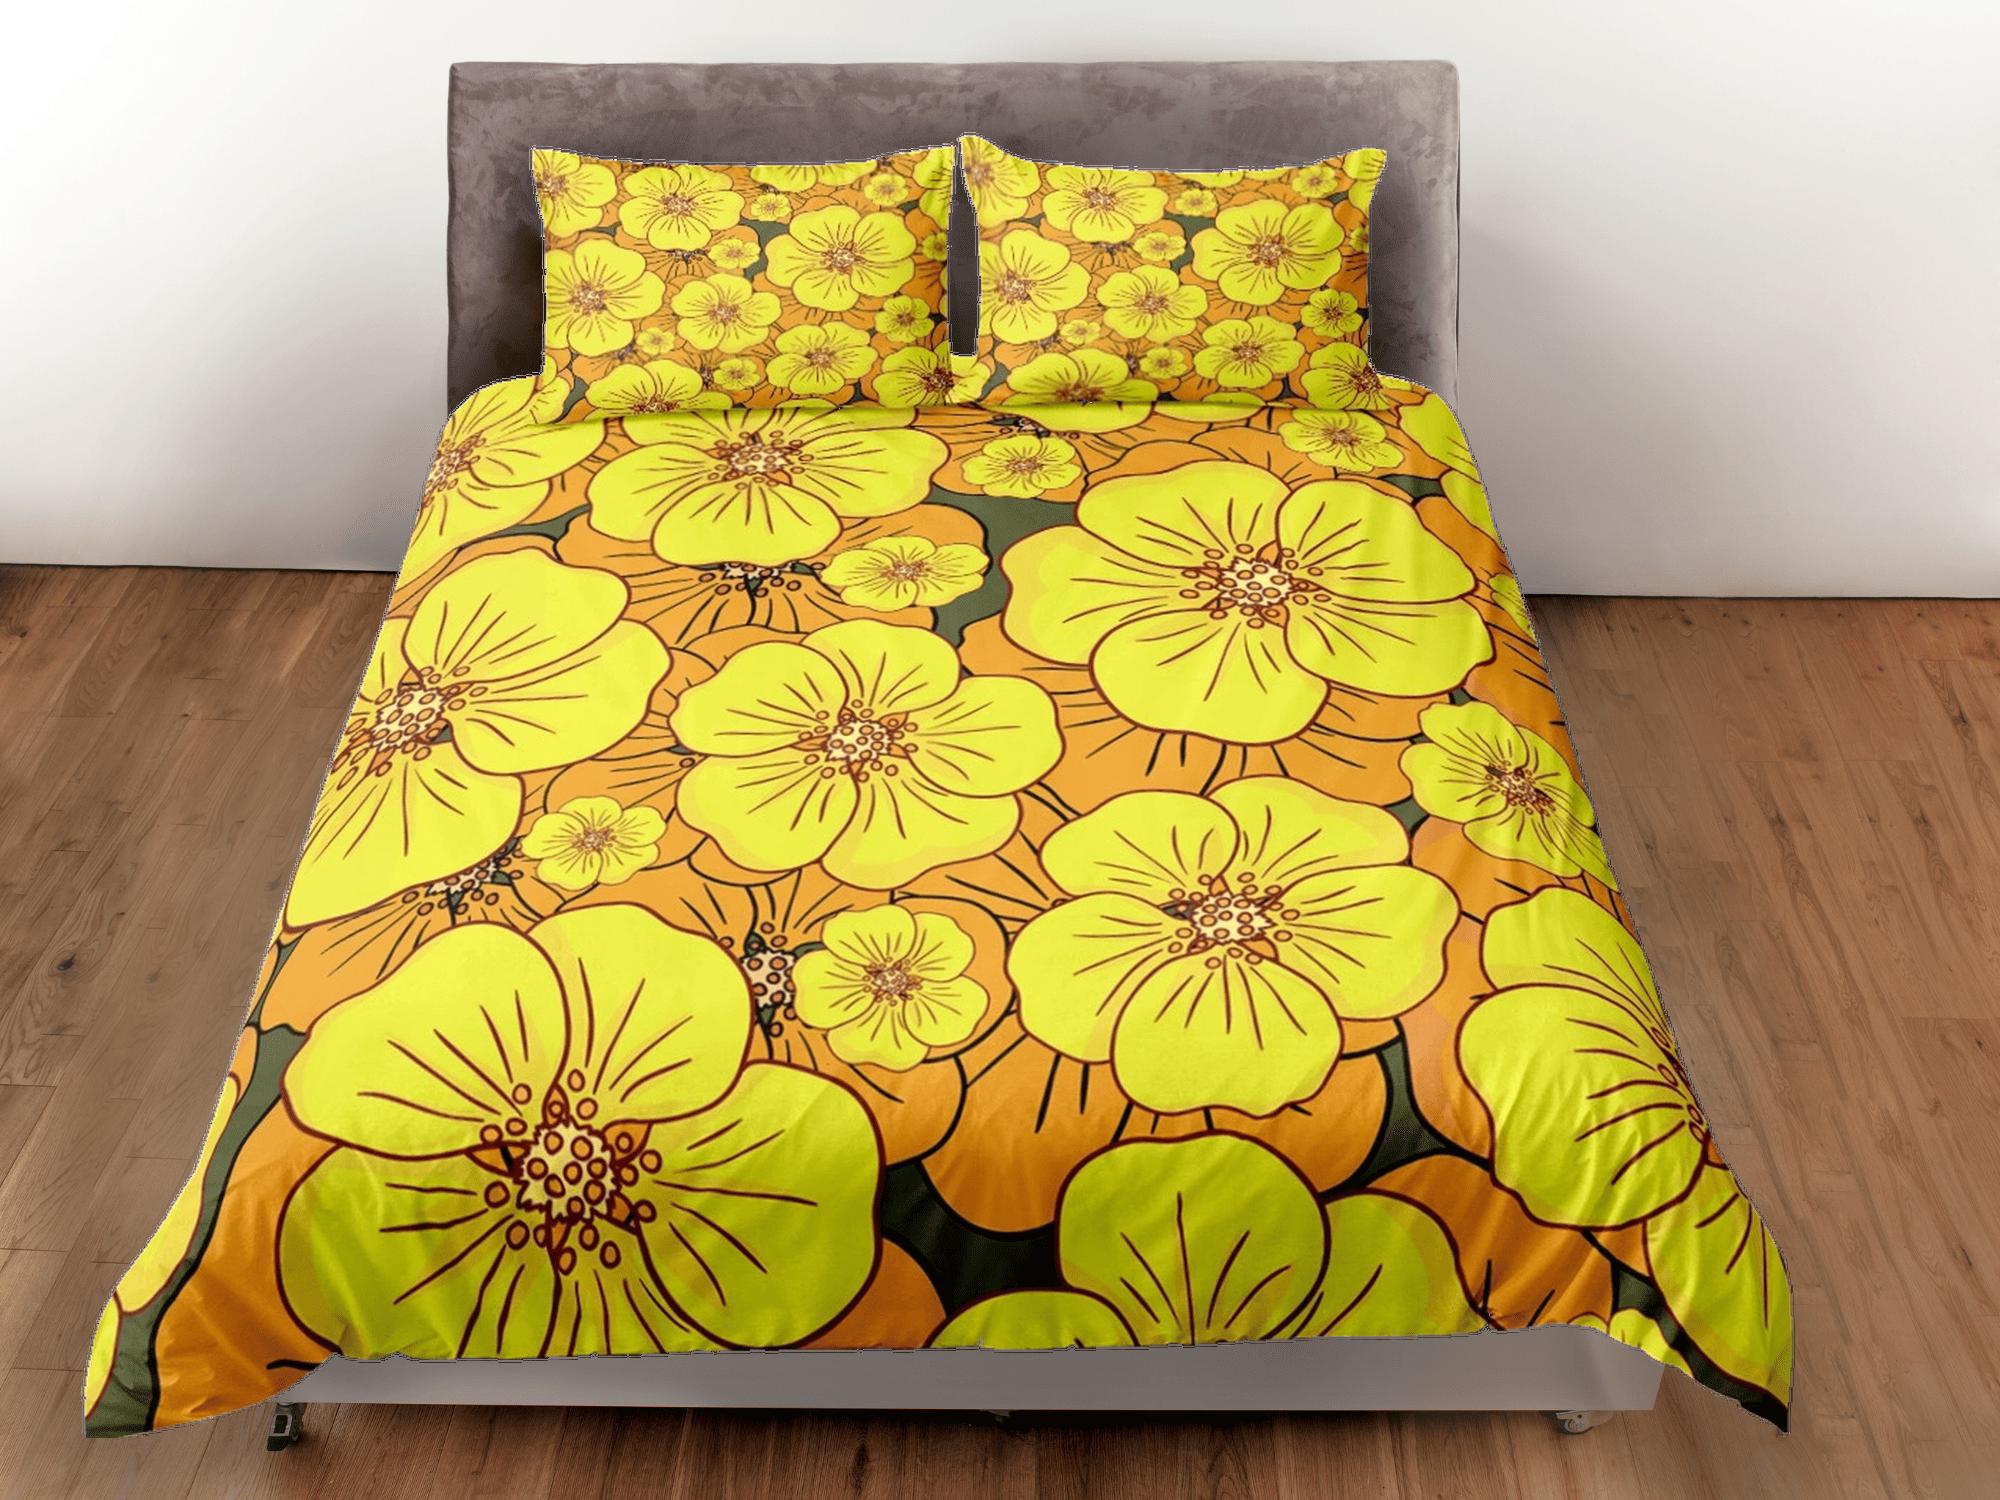 daintyduvet Mid century modern bedding yellow floral duvet cover colorful retro bedding, vintage style boho chic decor bedspread shabby chic bedding